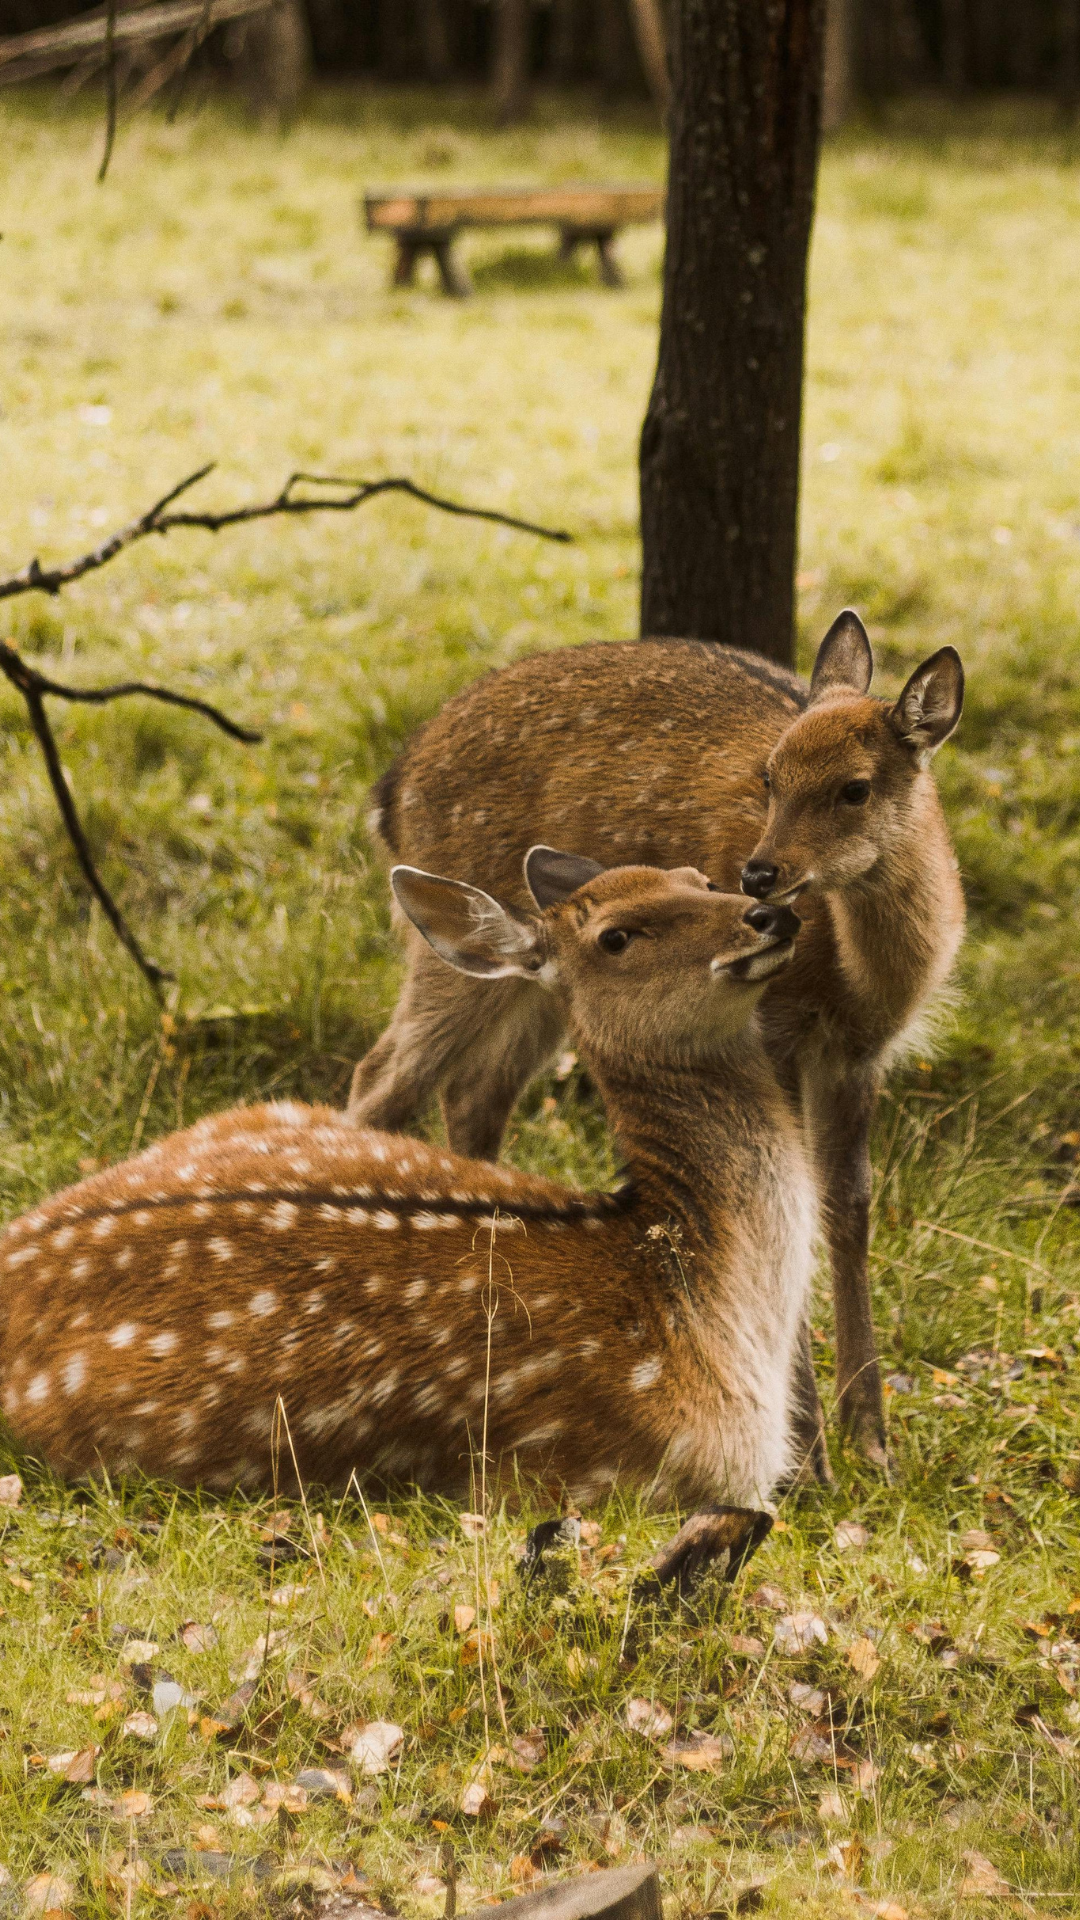 A baby fallow deer wanting attention from his mother in a grassy forest 